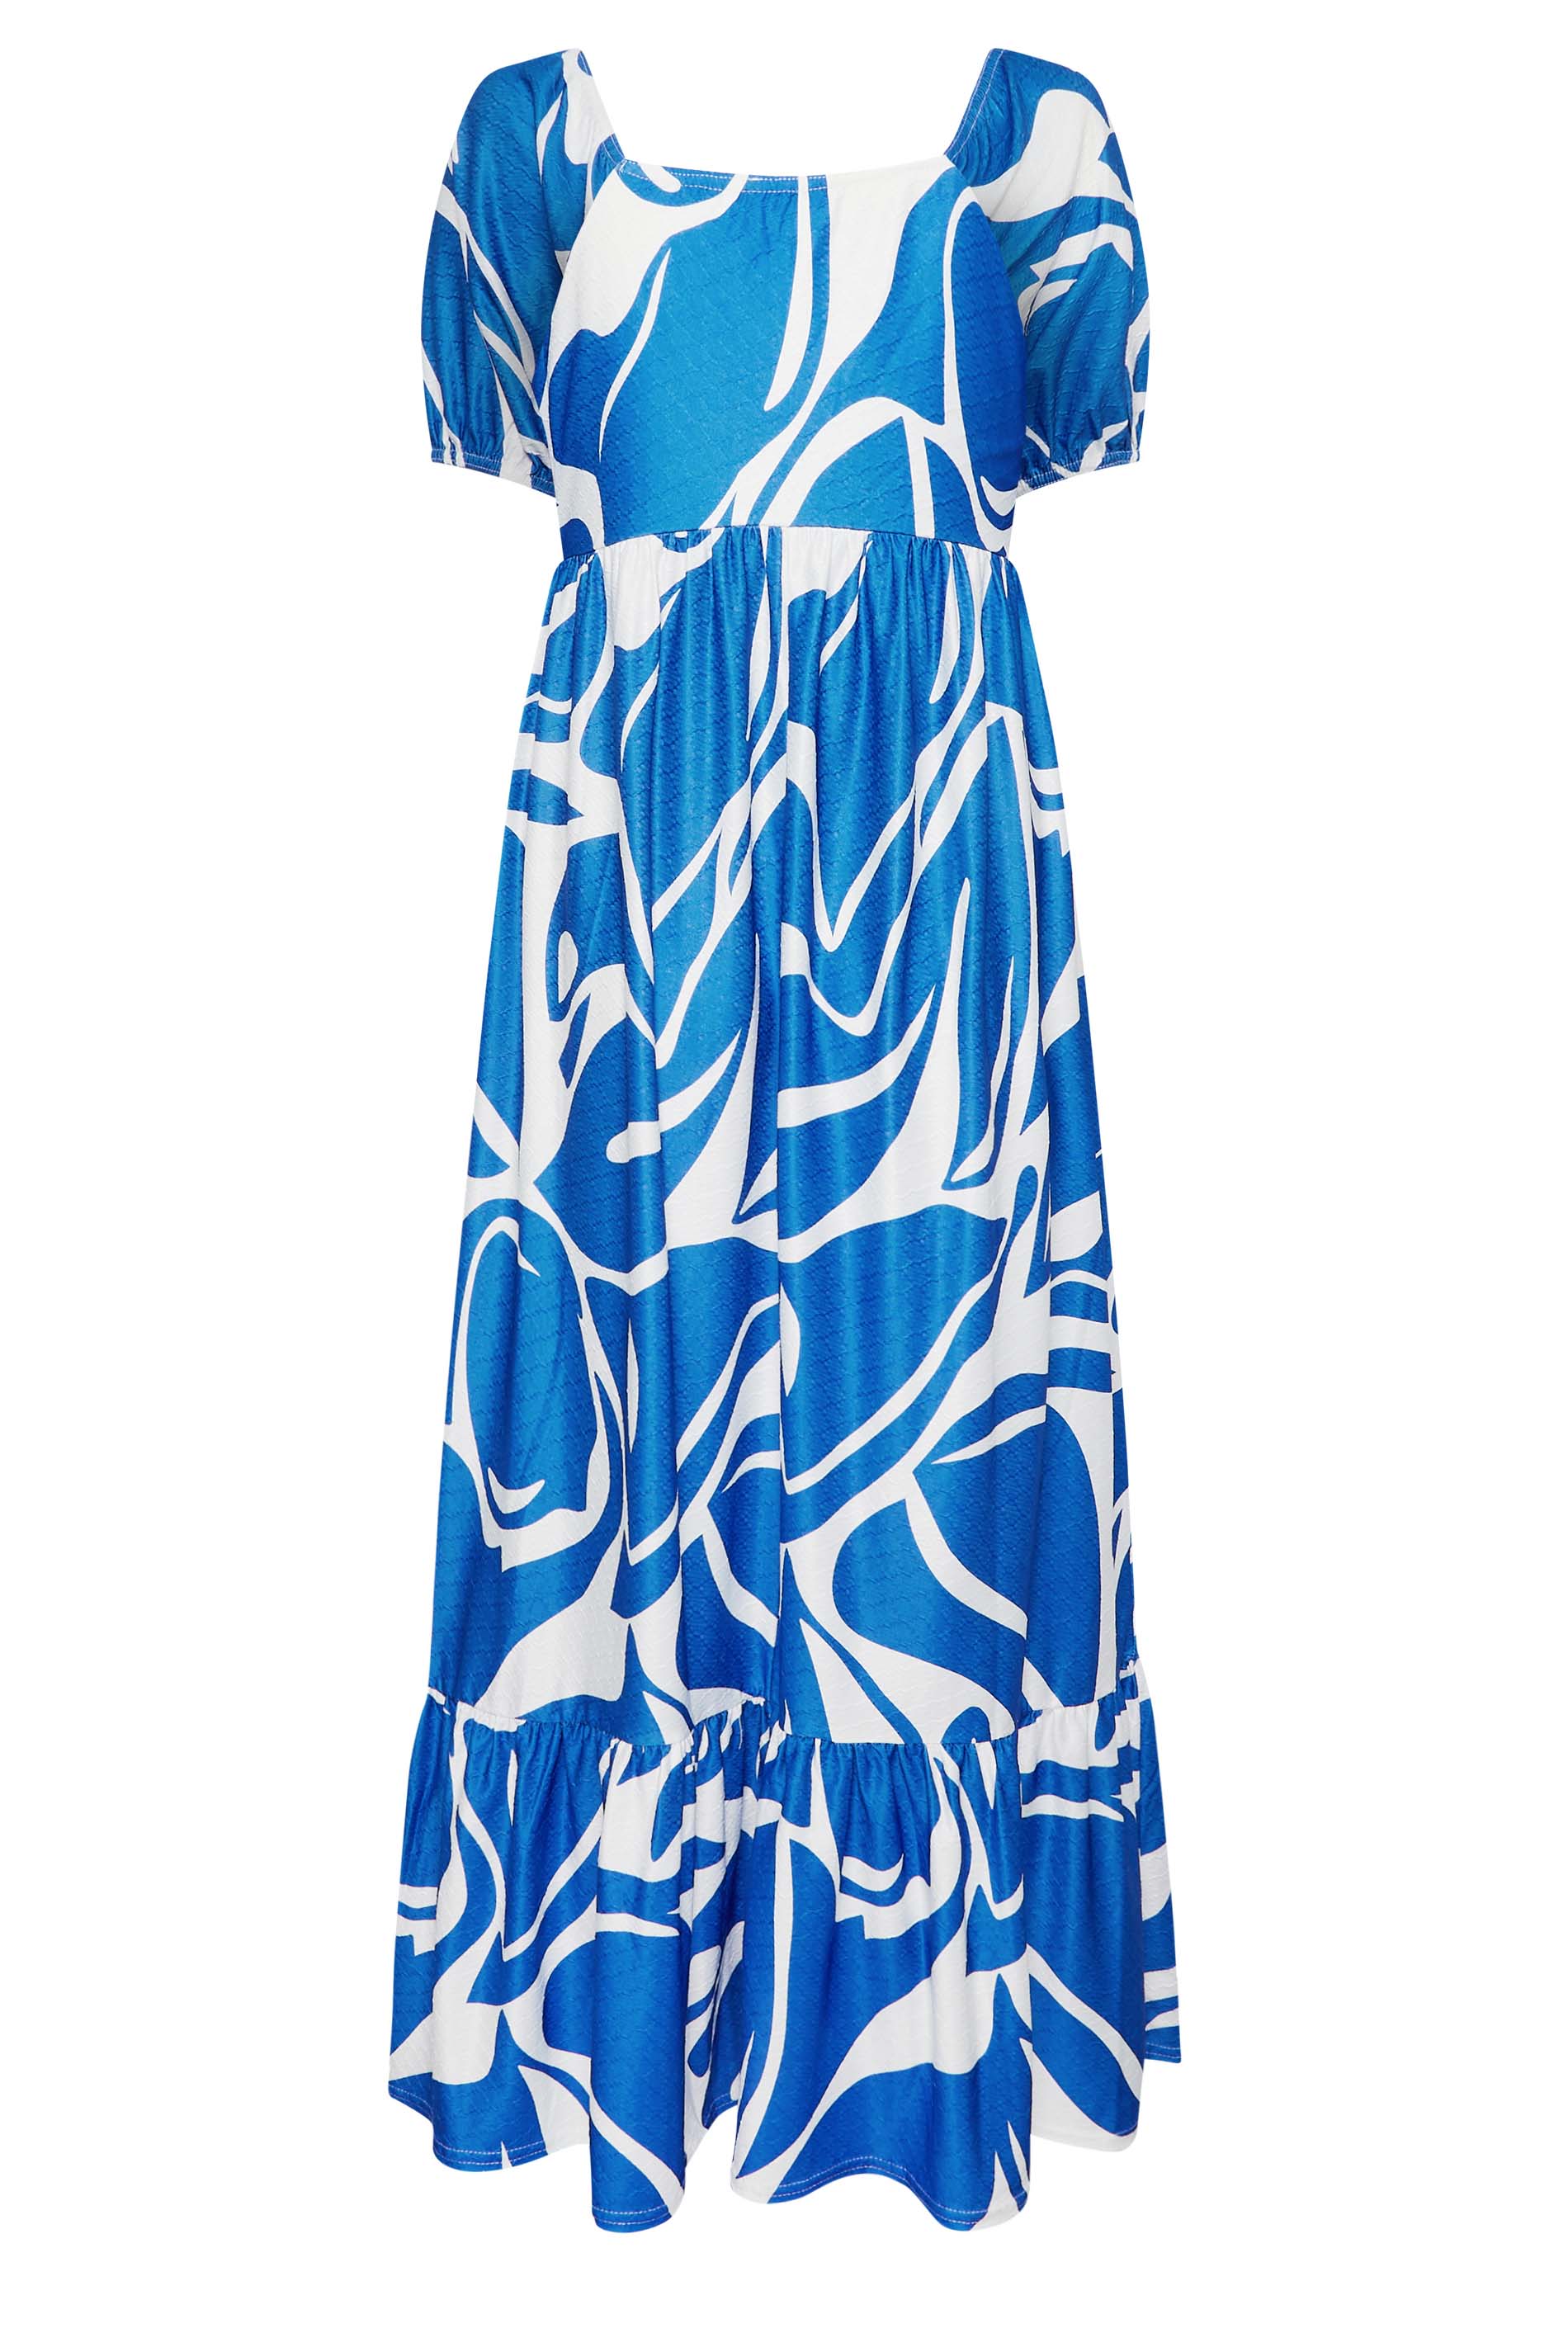 YOURS Plus Size Blue Swirl Print Maxi Dress | Yours Clothing